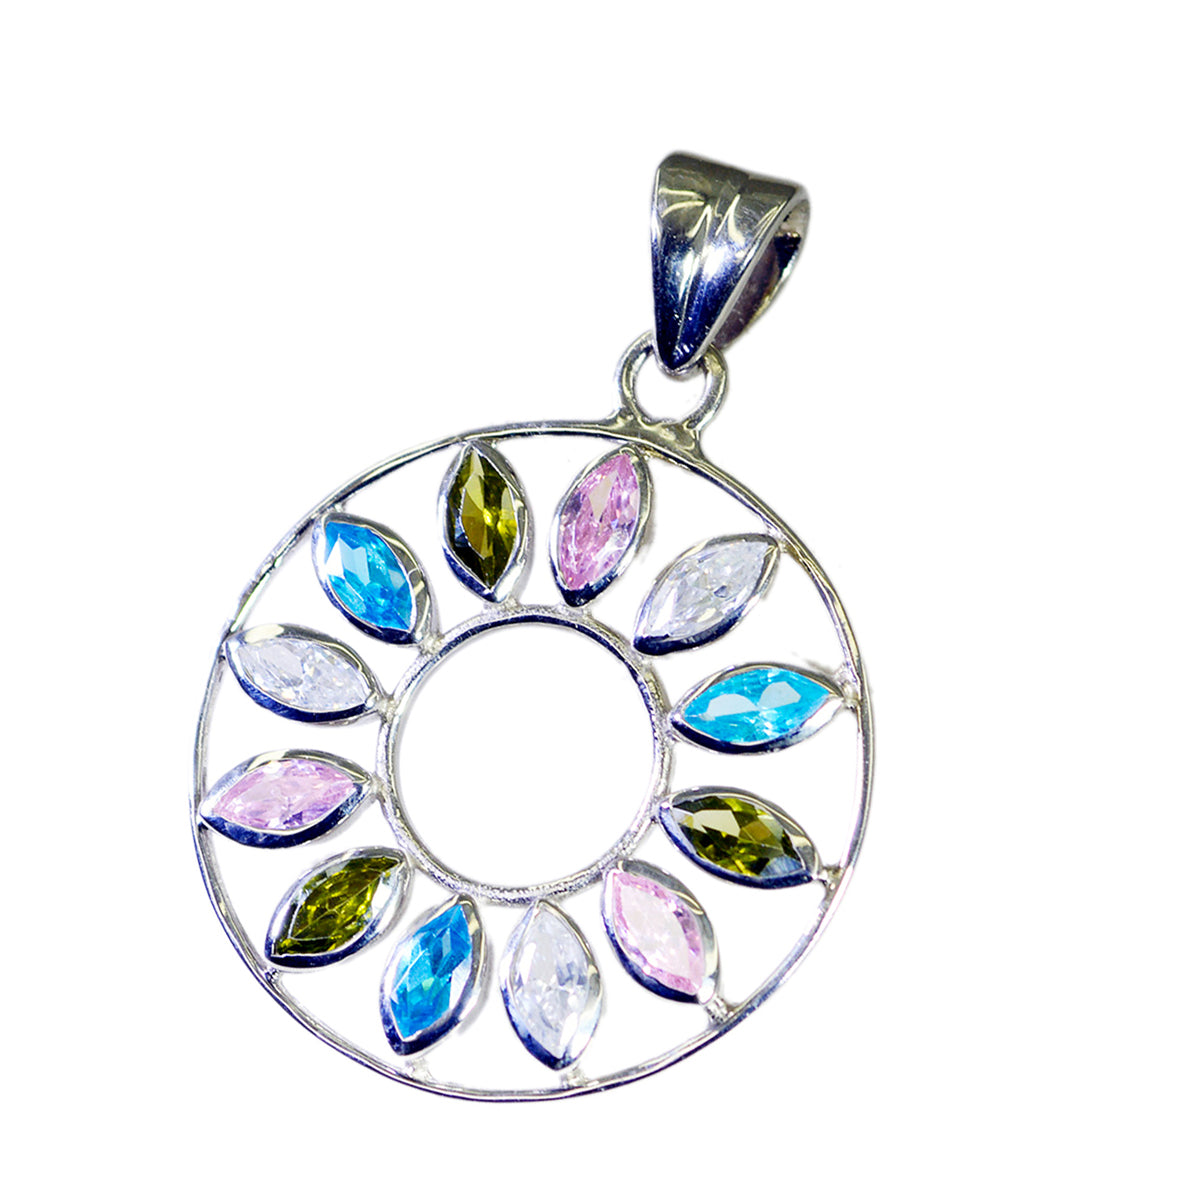 Riyo Bonny Gemstone Marquise Faceted Multi Color Multi Stone 1038 Sterling Silver Pendant Gift For Good Friday